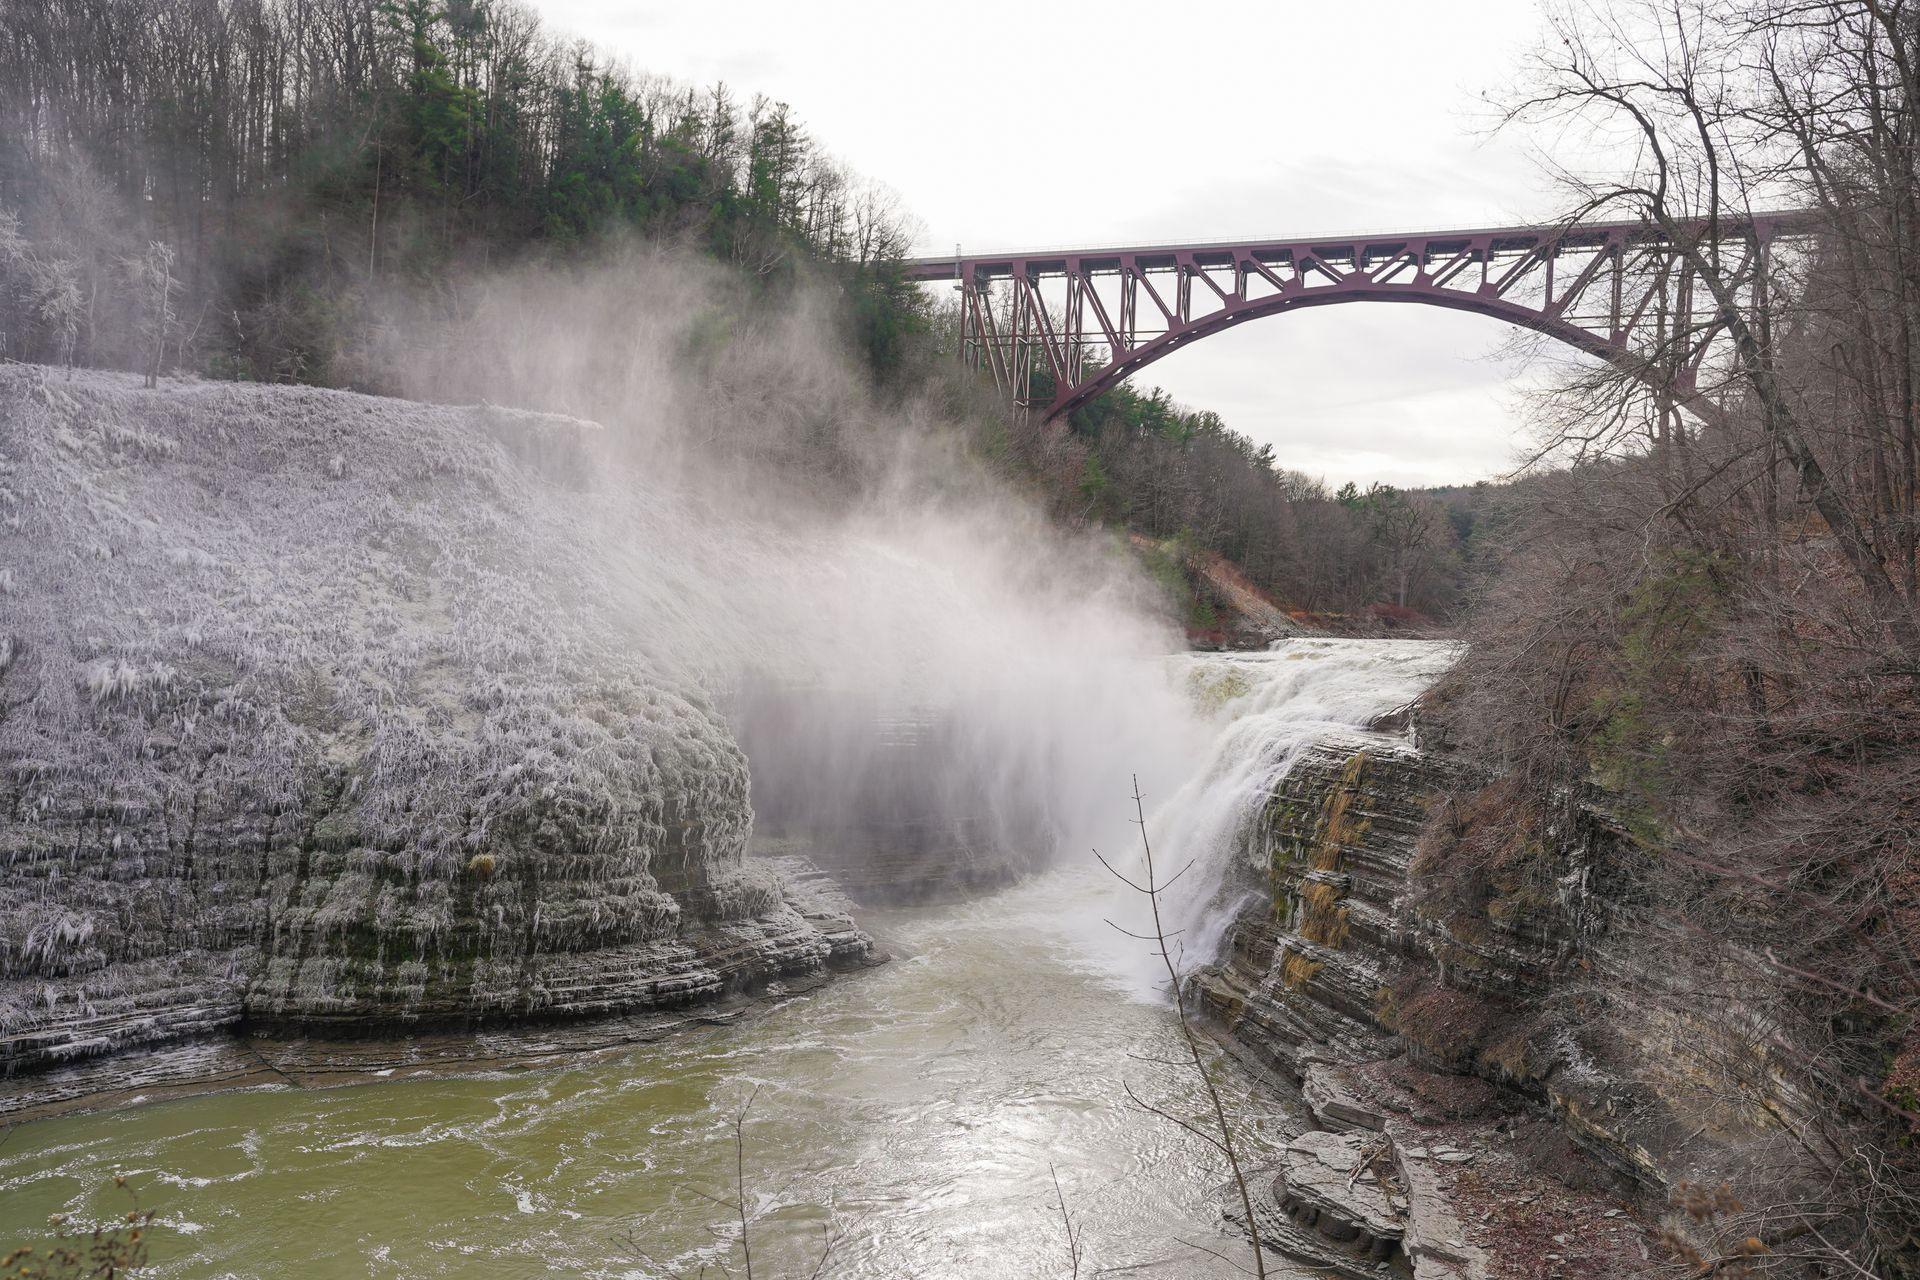 A view of Upper Falls in Letchworth State Park. There is a dusting of snow and ice on the rocks next to the waterfall.